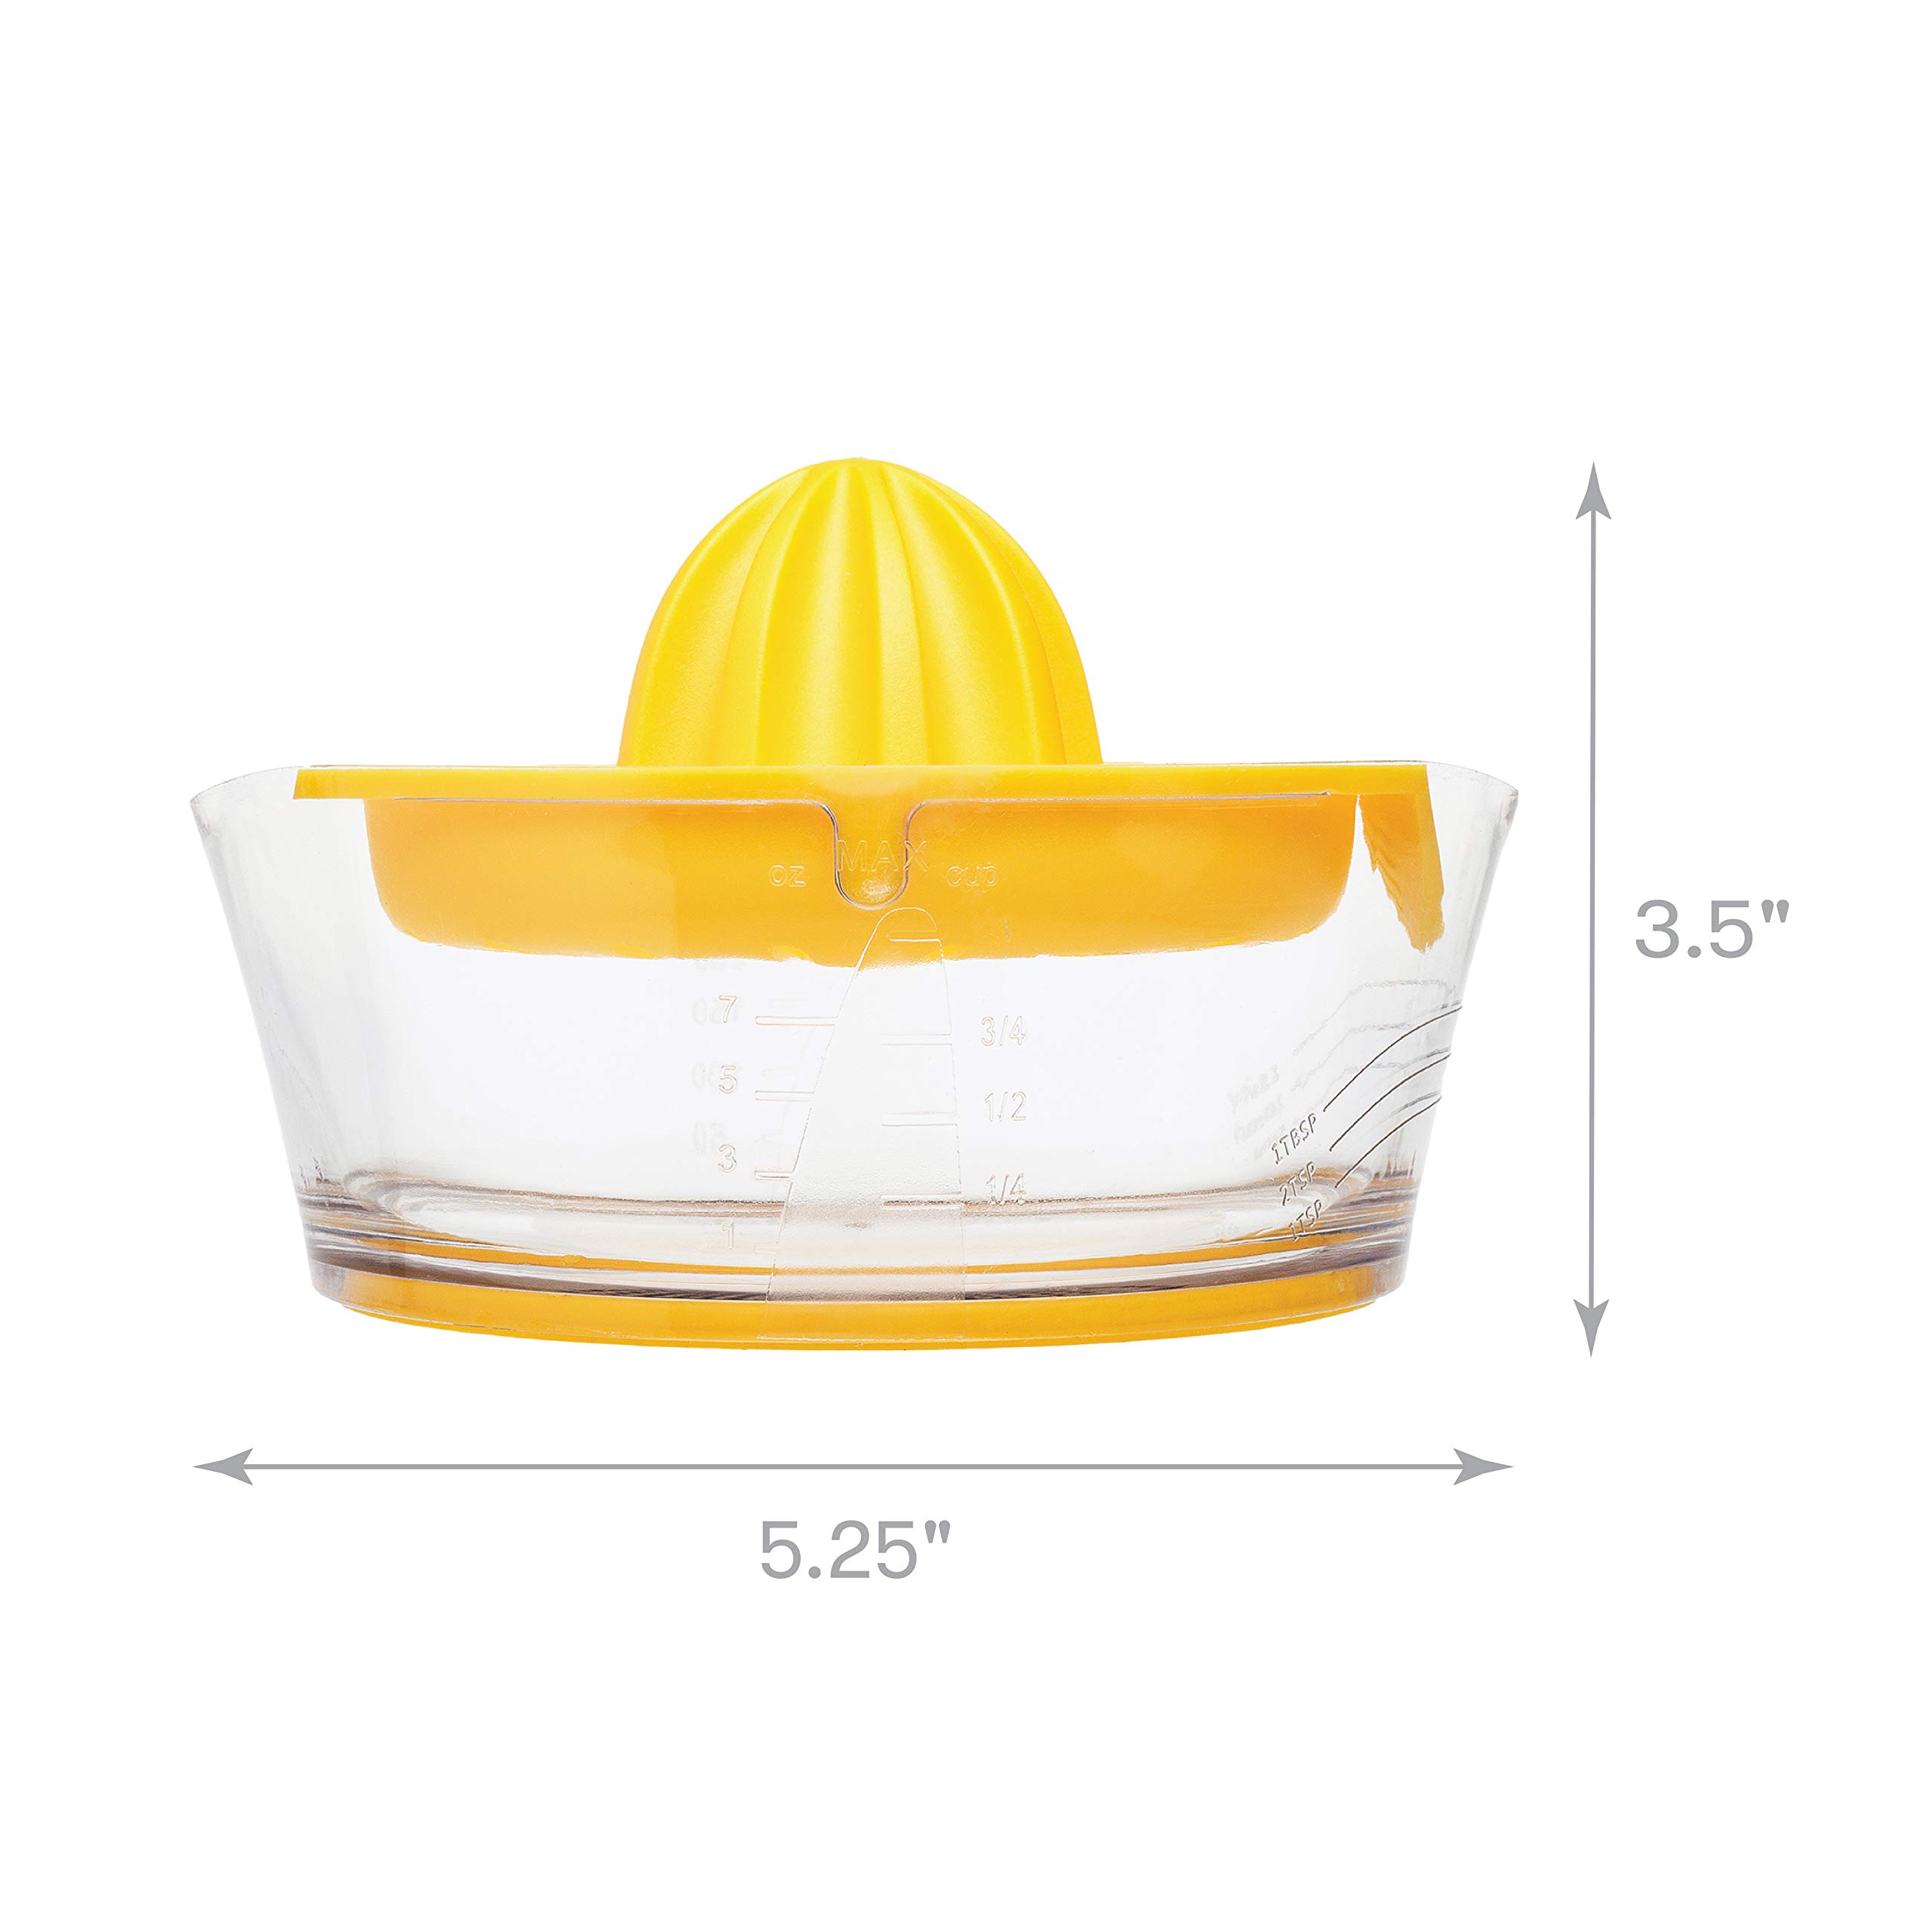 Cooking Light Manual Hand Built-in Strainer and Measuring Cup, 2 Size Reamers Included, Premium Quality Lemon Orange Lime Juicer, Yellow